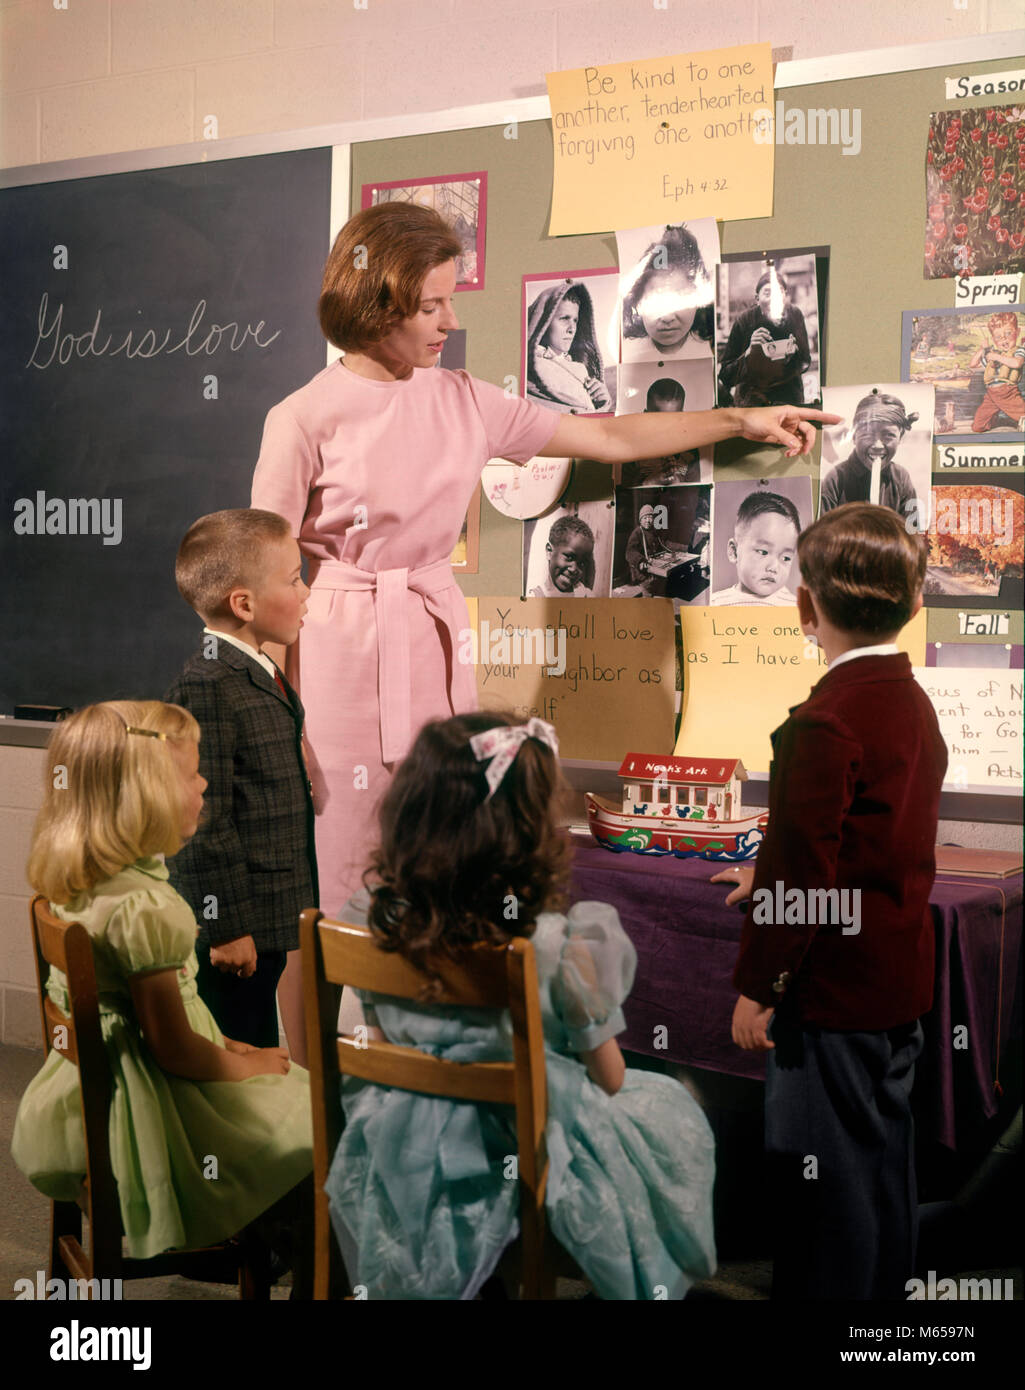 1960s WOMAN SUNDAY SCHOOL TEACHER POINTING AT BULLETIN BOARD WITH TWO BOYS AND TWO GIRLS IN CLASS - kc2354 HAR001 HARS RELIGION FEMALES 5 SUNDAY GROWNUP COPY SPACE HALF-LENGTH LADIES GROWN-UP INDOORS NOSTALGIA TOGETHERNESS 25-30 YEARS 30-35 YEARS 7-9 YEARS SCHOOLS 5-6 YEARS RELIGIOUS COOPERATION SMALL GROUP OF PEOPLE CHURCHES FAITH JUVENILES MALES MID-ADULT MID-ADULT WOMAN BELIEF BULLETIN BOARD CAUCASIAN ETHNICITY DEVOUT GOD IS LOVE OLD FASHIONED PERSONS SUNDAY SCHOOL Stock Photo